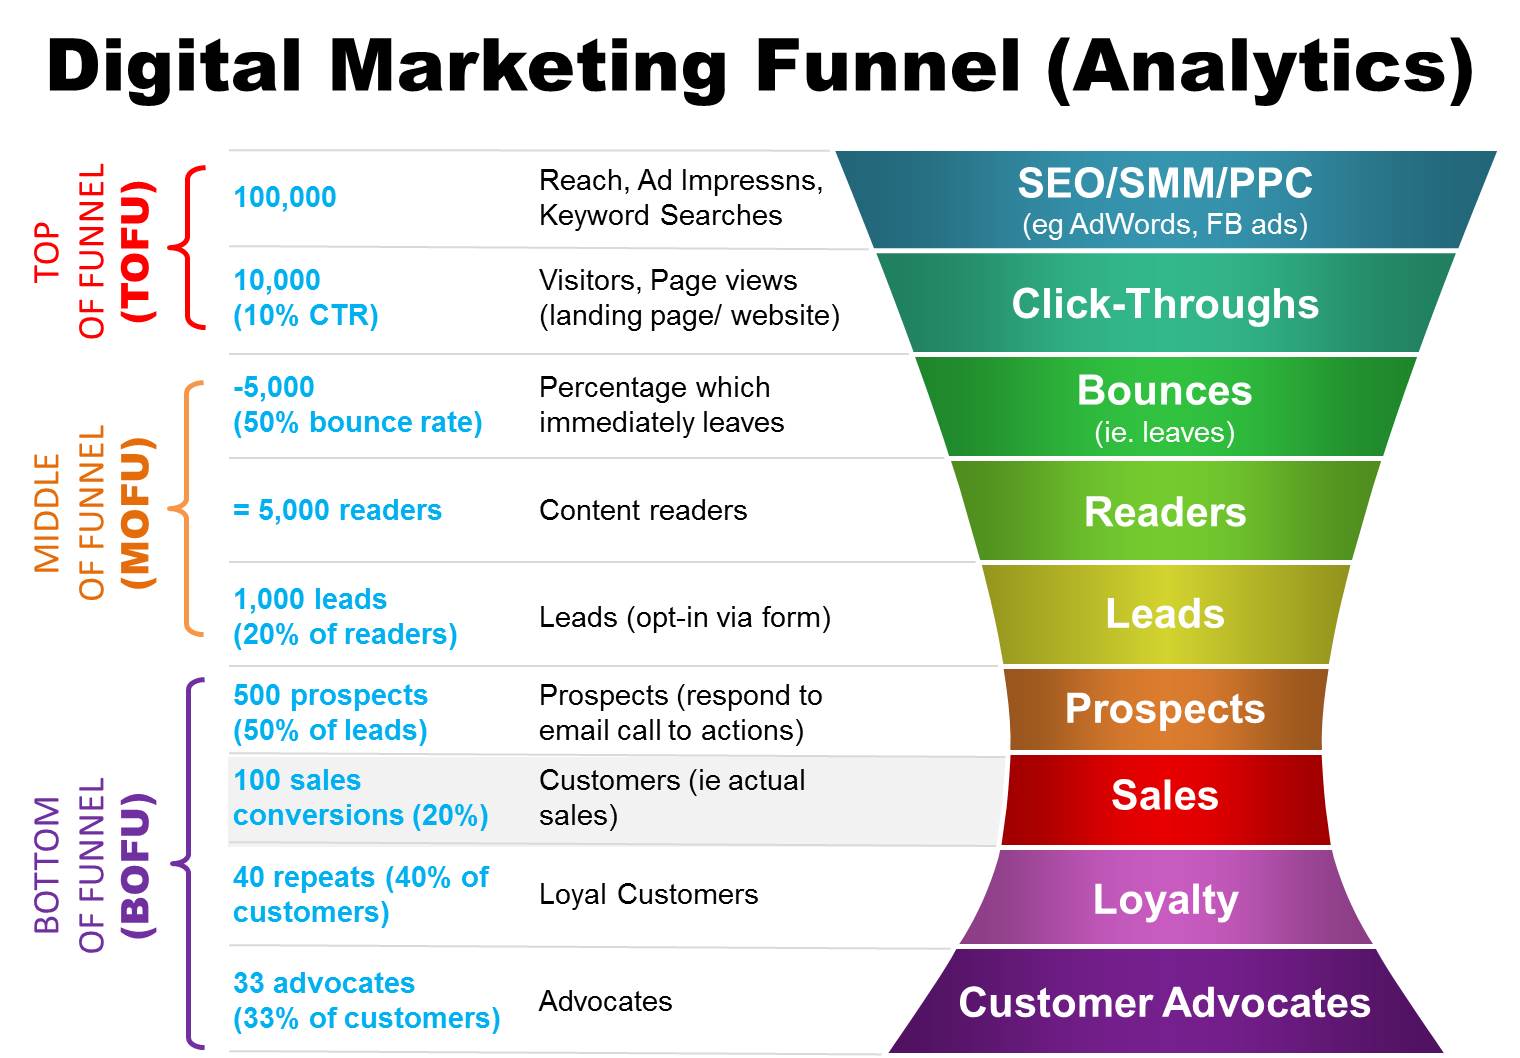 Measuring your Funnel